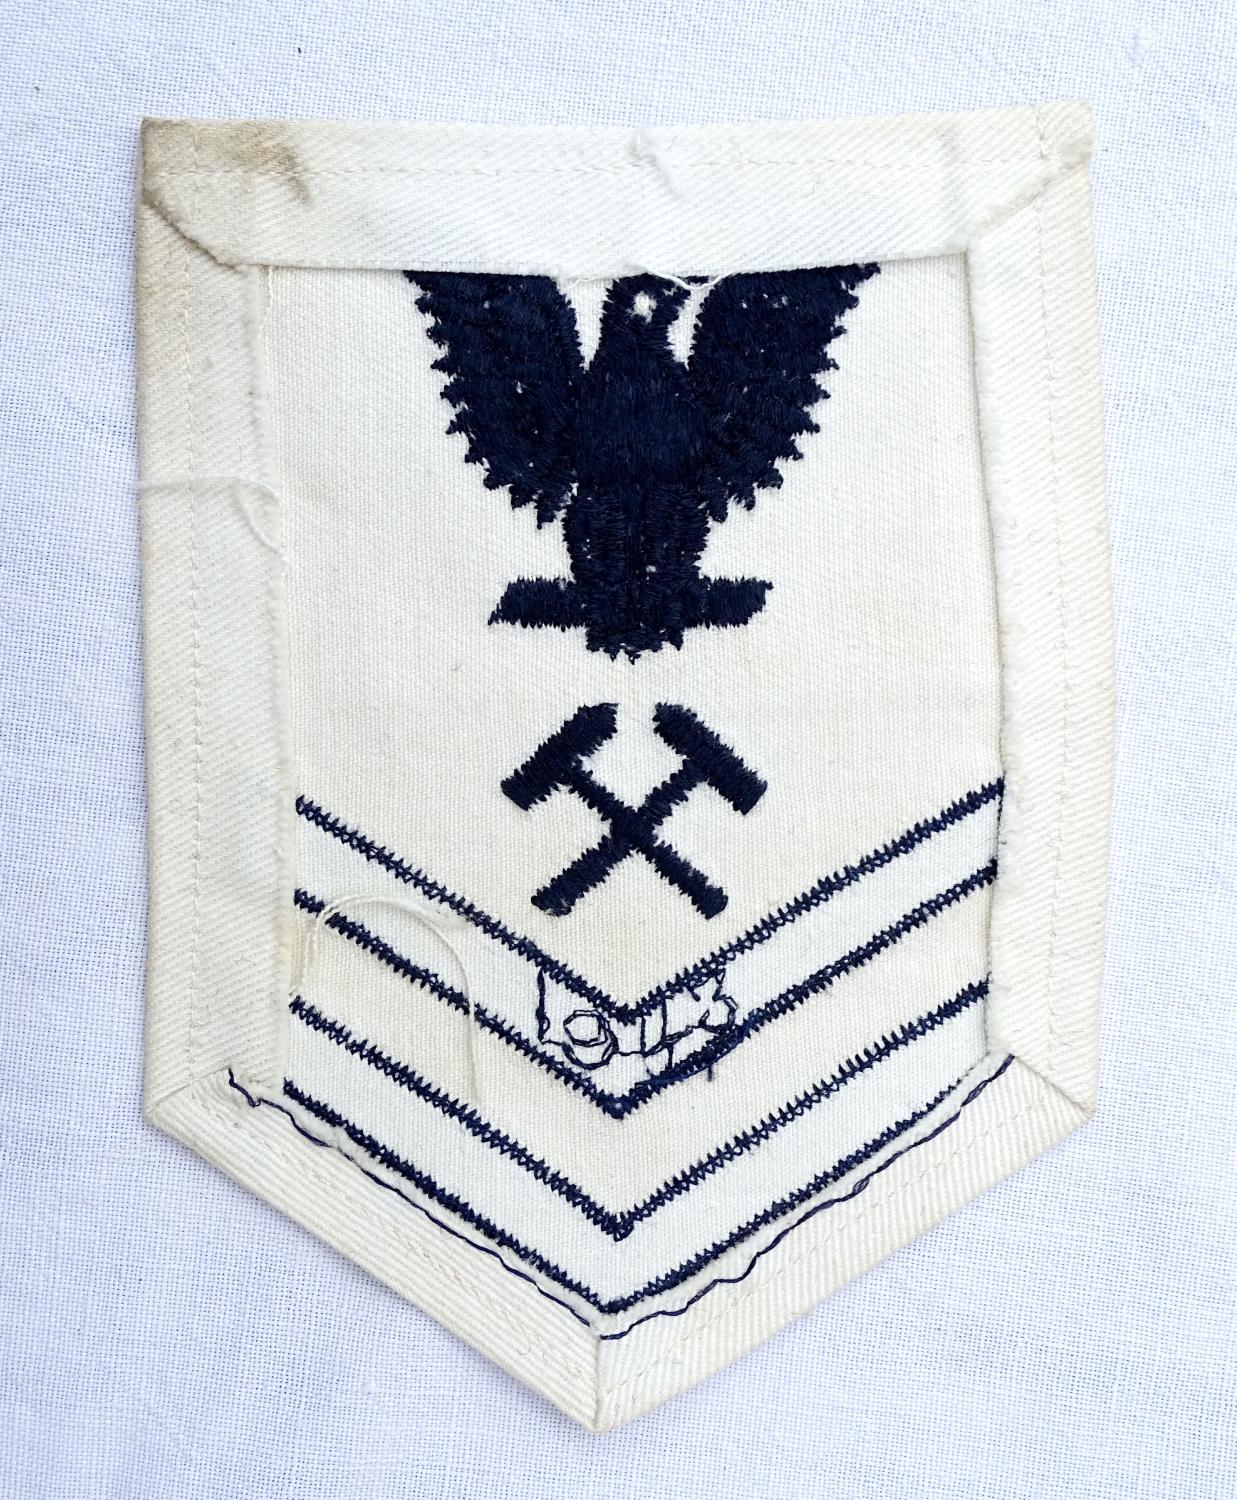 Sleeve rate USN Petty Officer 2nd class  brod&eacute; 1943